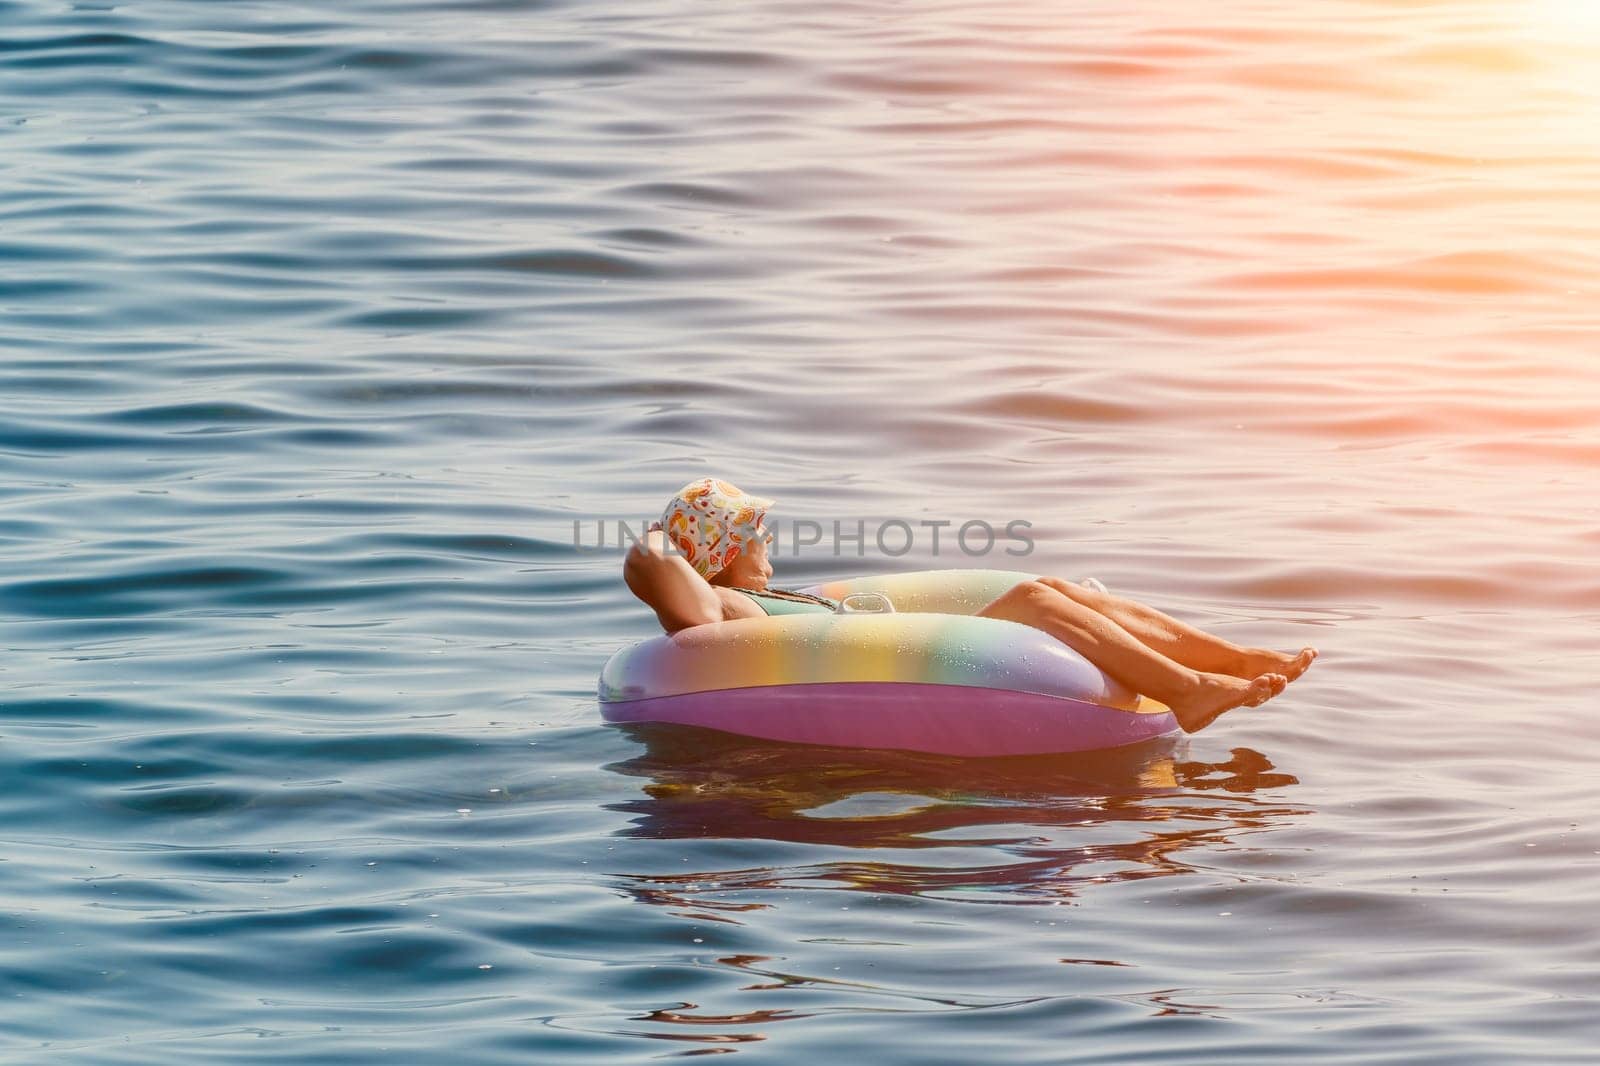 Summer Vacation Woman in hat floats on an inflatable donut mattress, a water toy swim ring. Unrecognizable young woman relaxing and enjoying family summer travel holidays vacation on the sea